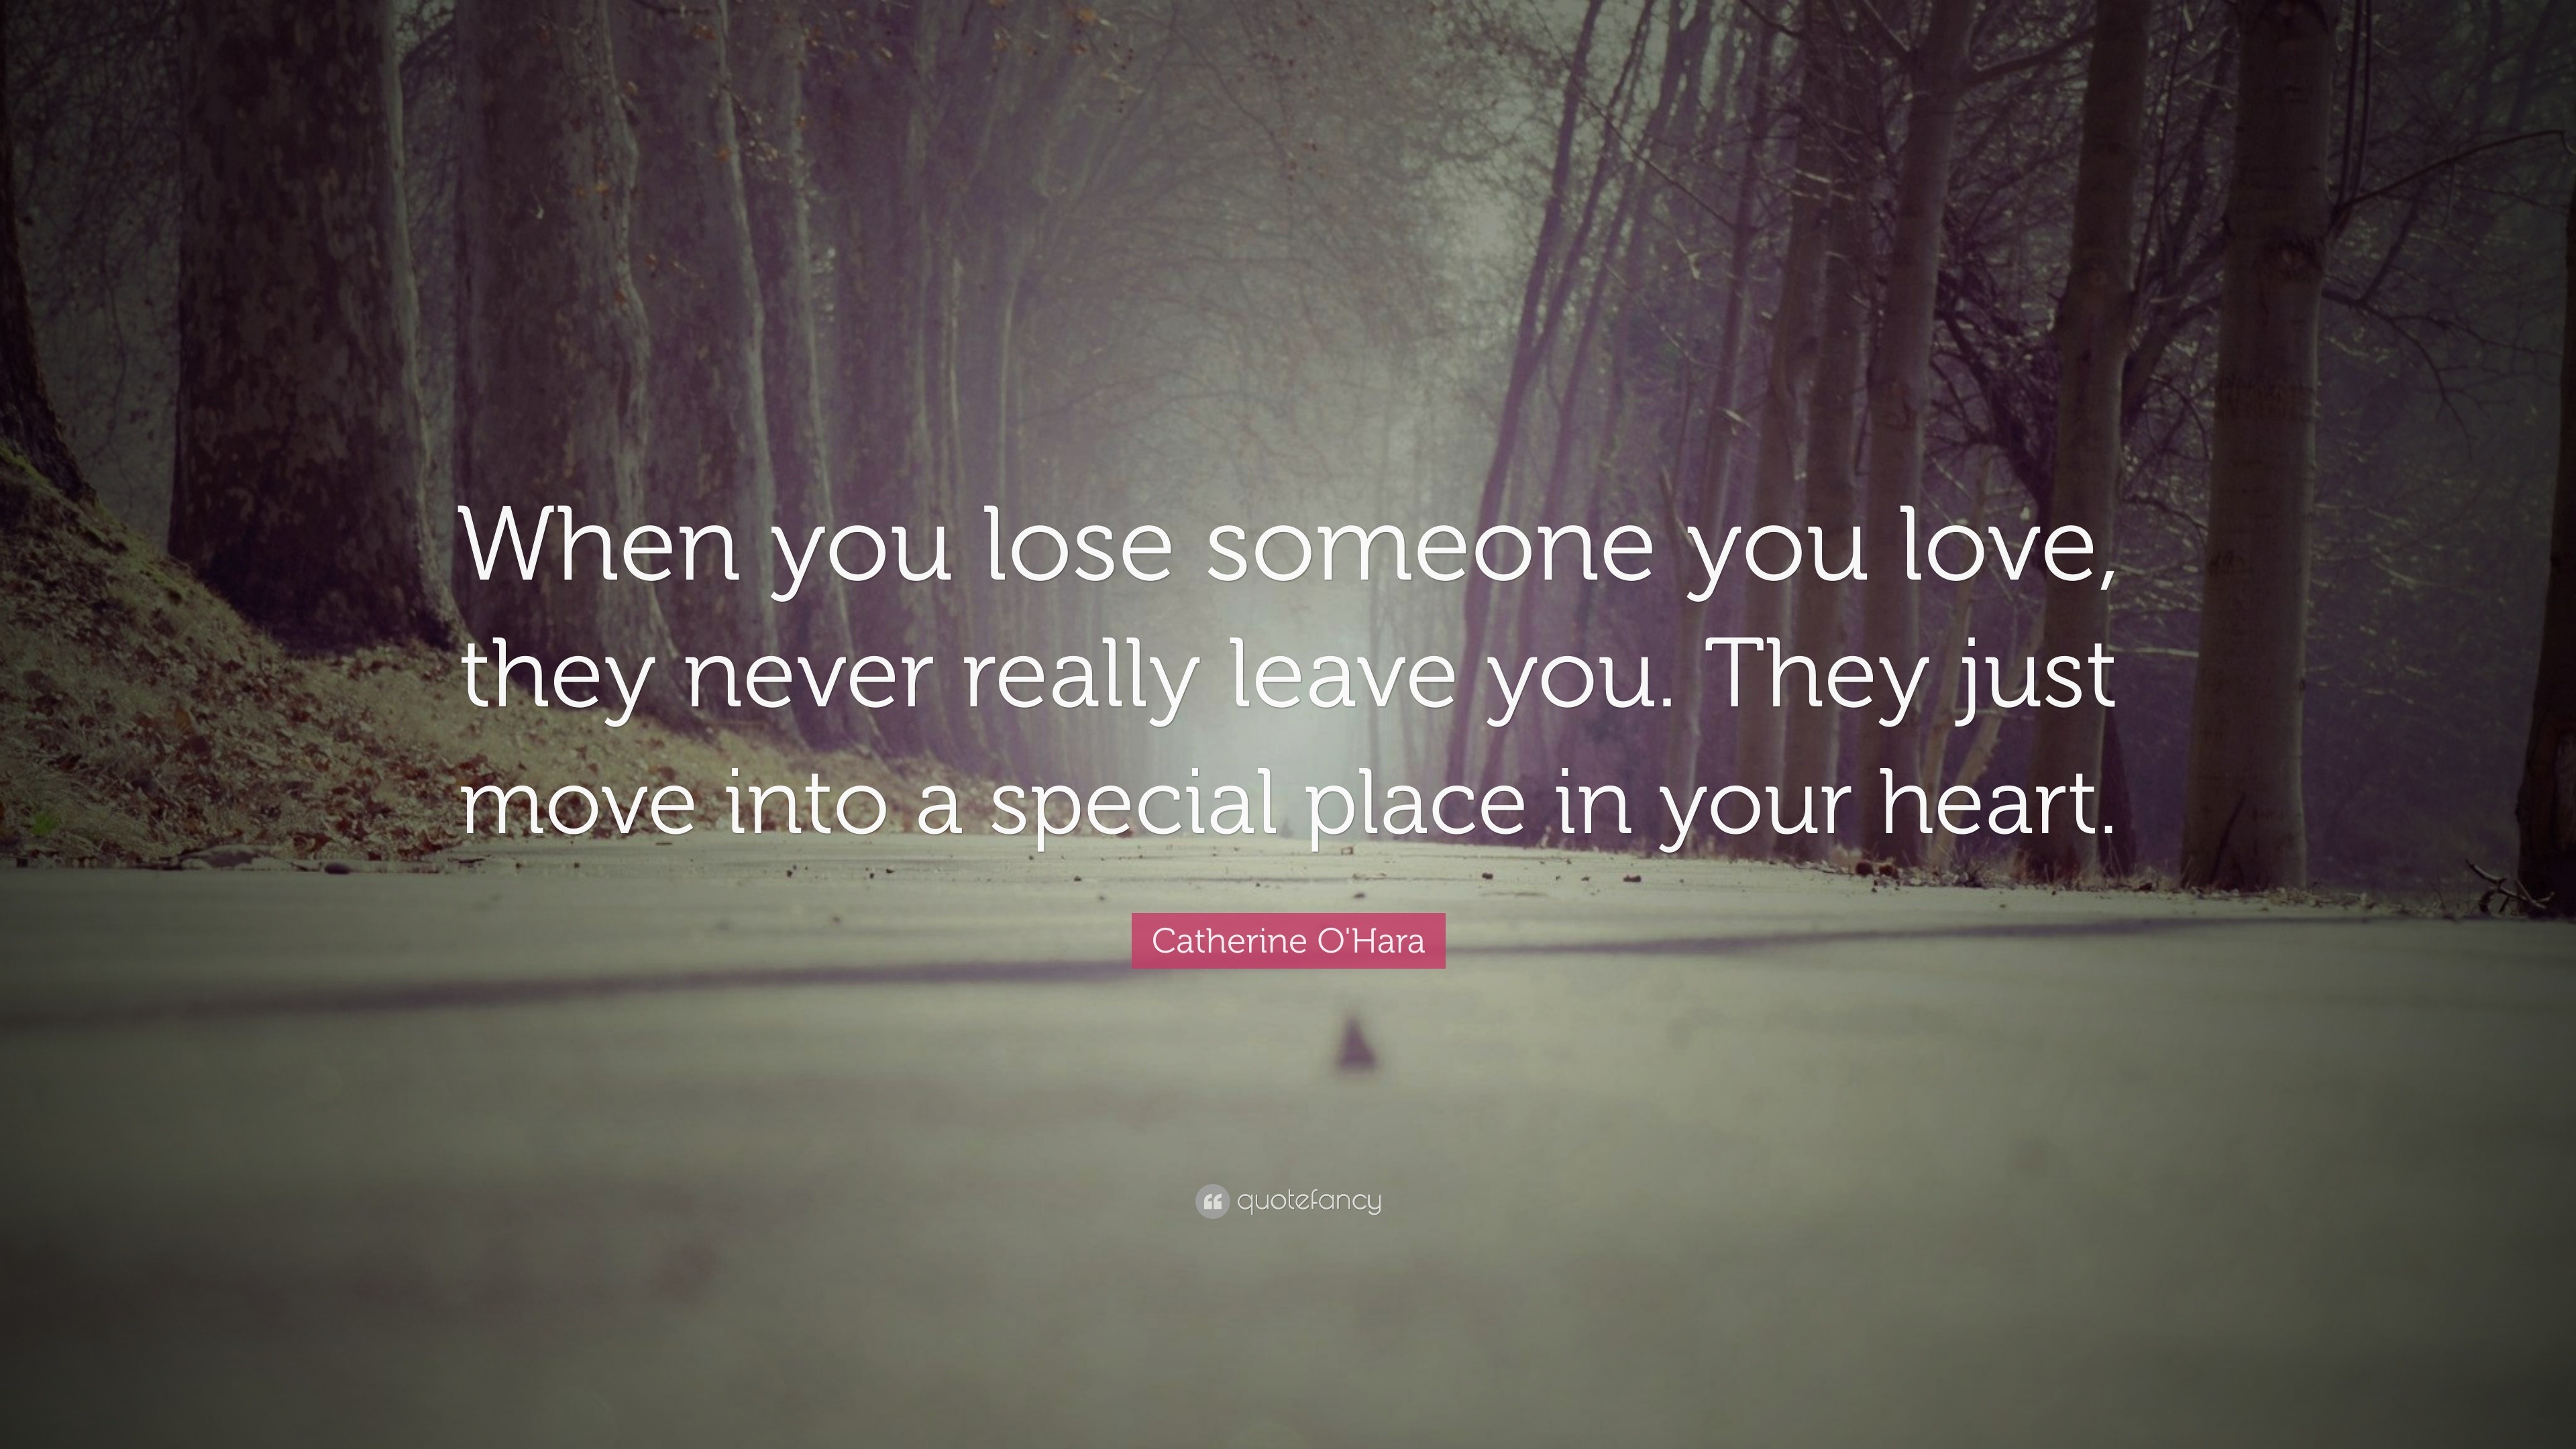 Catherine O Hara Quote “When you lose someone you love they never